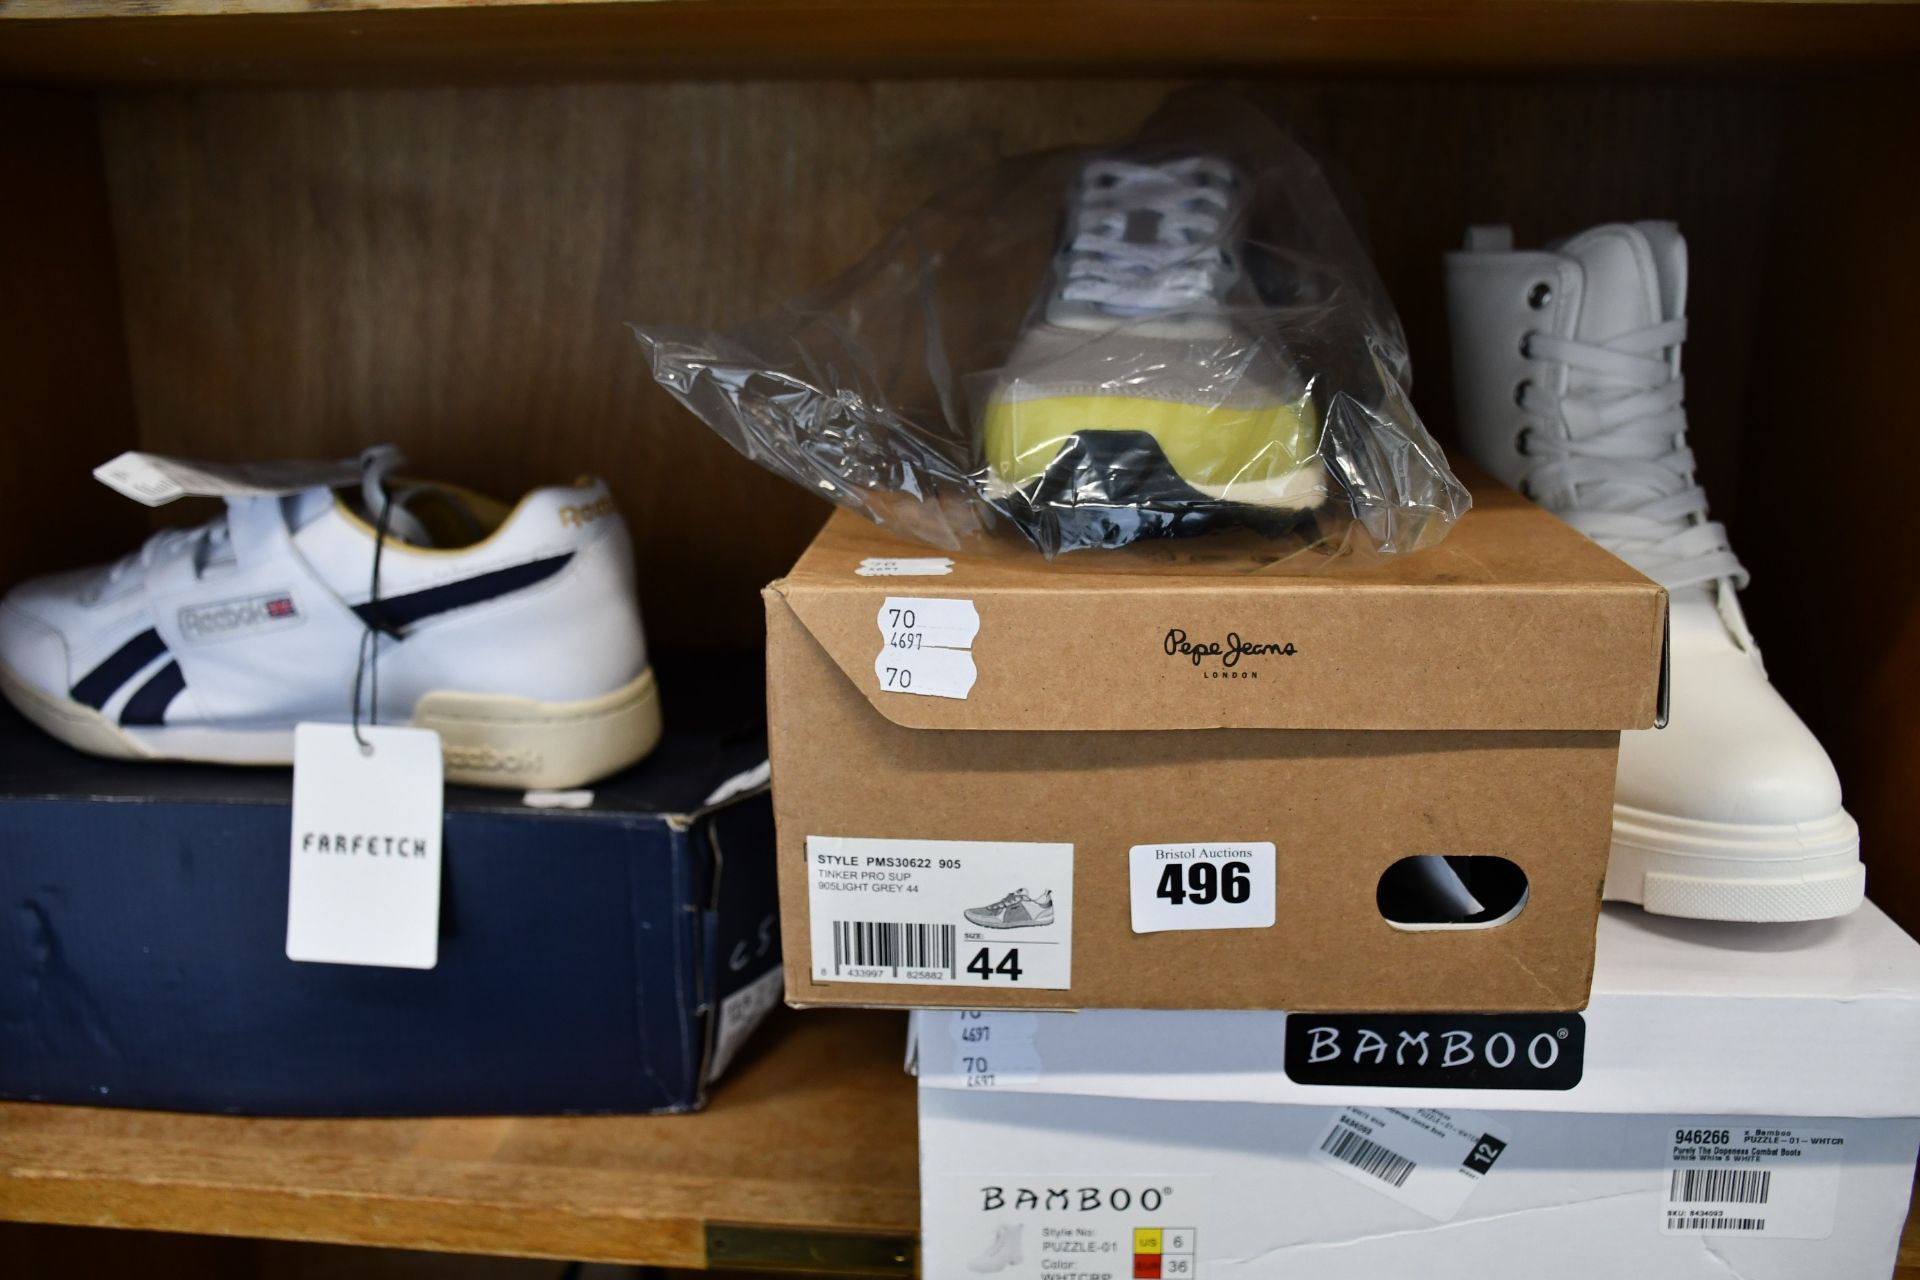 A pair of Pepe Jeans Tinker Pro Sup trainers (Size 44?), a pair men's of Reebok Workout Plus